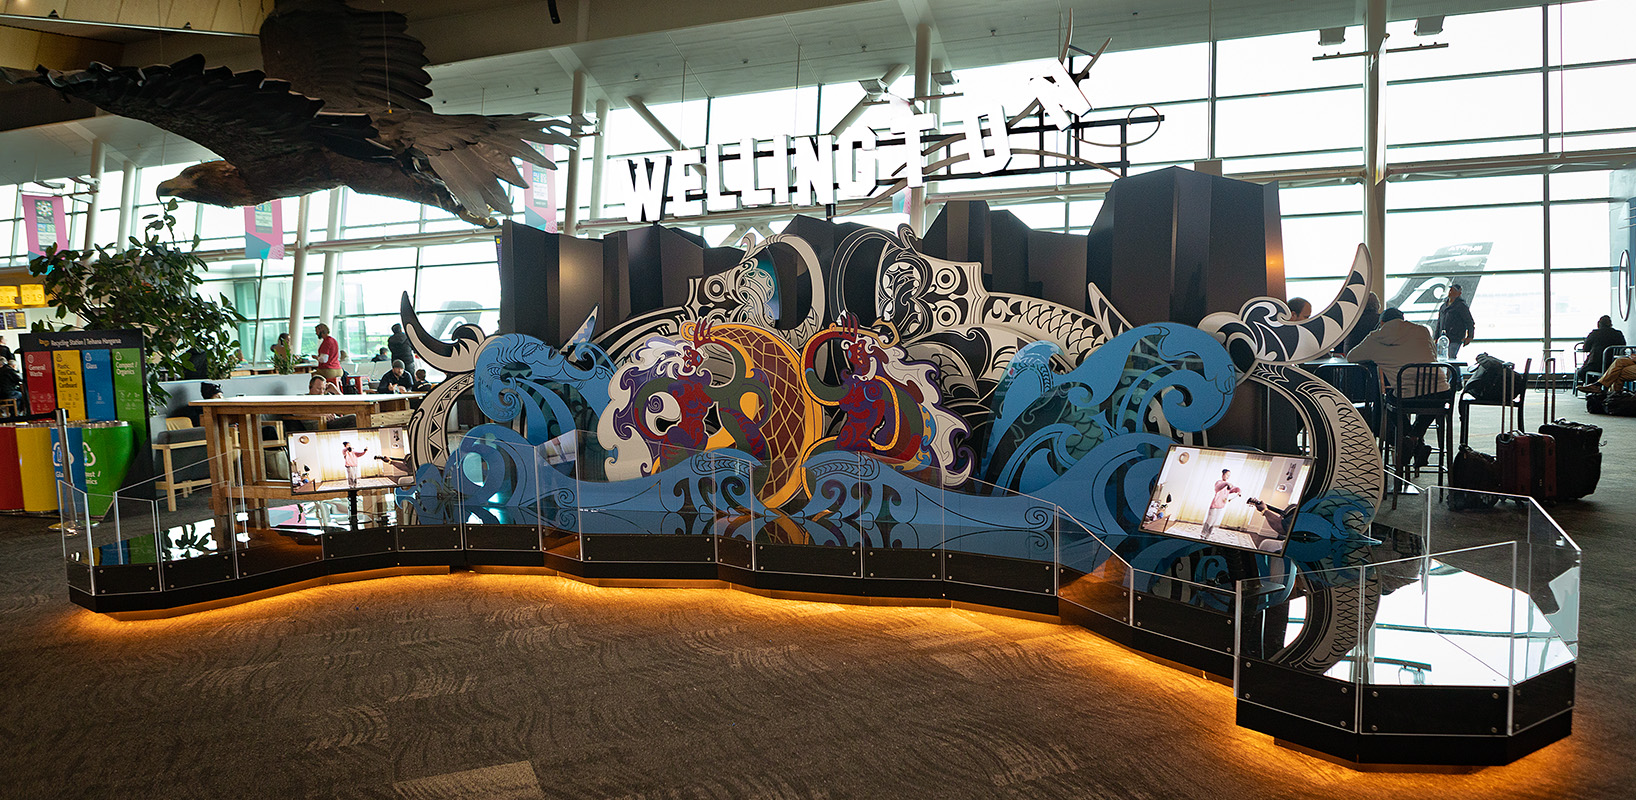 Wellington Airport Activation Stage